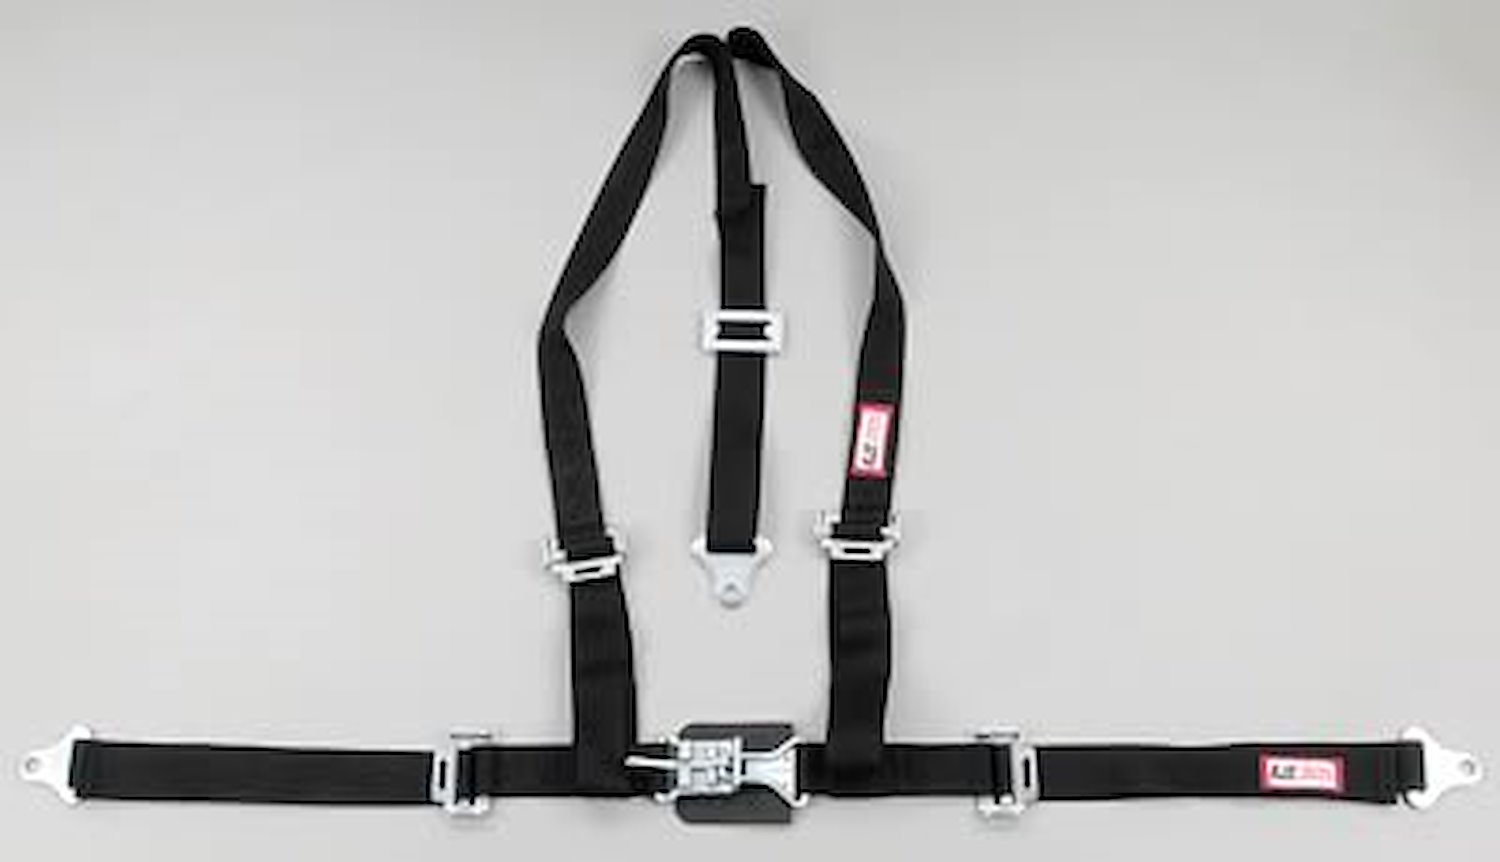 NON-SFI L&L HARNESS 2 PULL UP Lap Belt SNAP SEWN IN 2 S.H. Y FLOOR Mount w/STERNUM STRAP WRAP/SNAP PURPLE